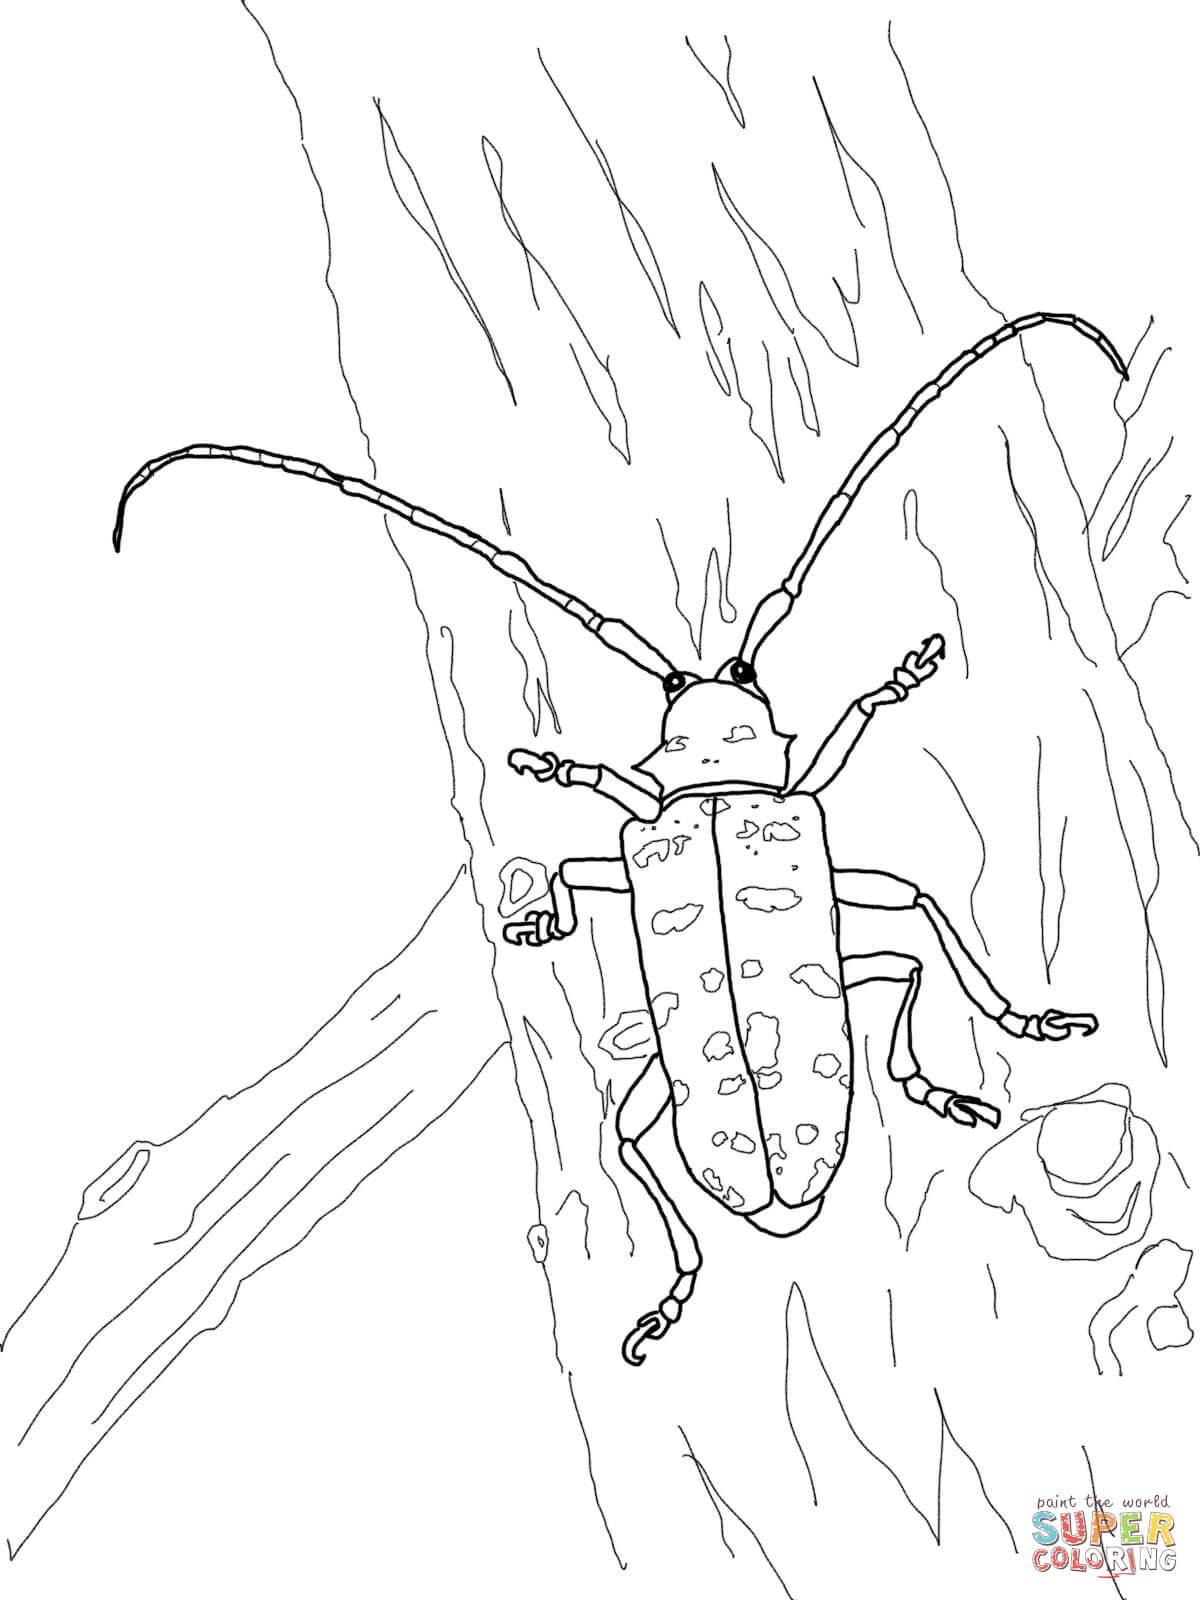 Beetles coloring pages | Free Coloring Pages